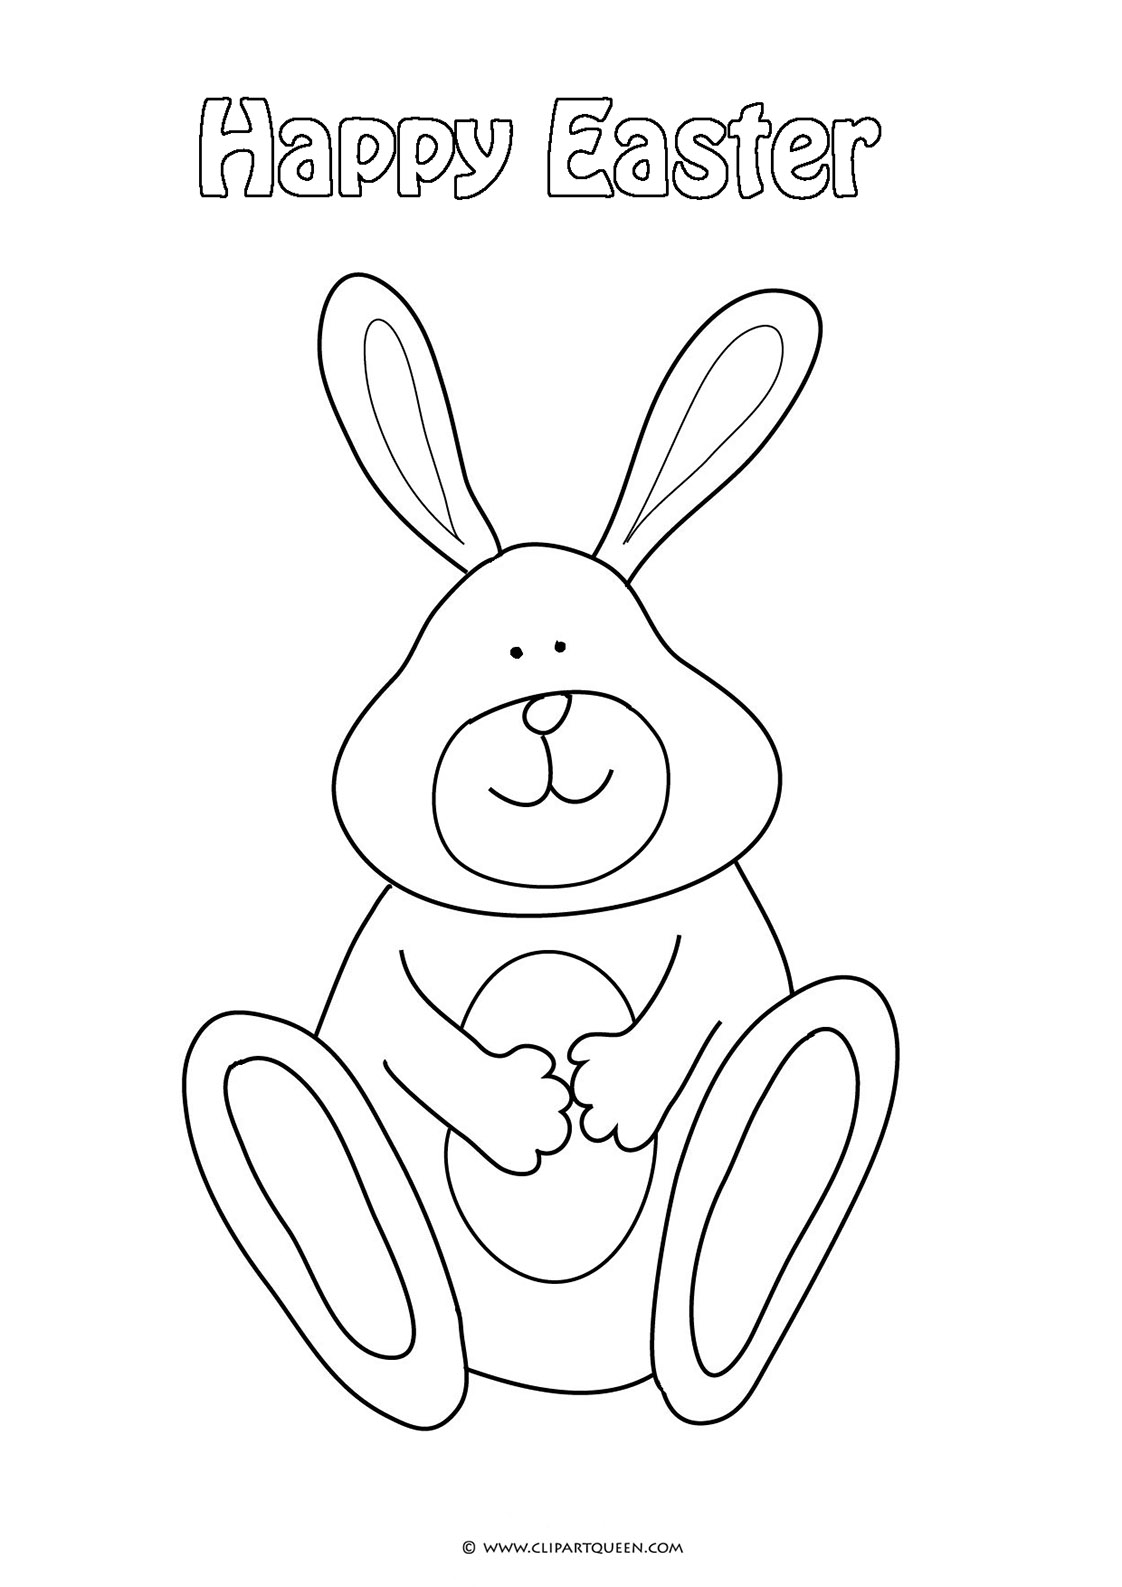 Cute bunny for coloring